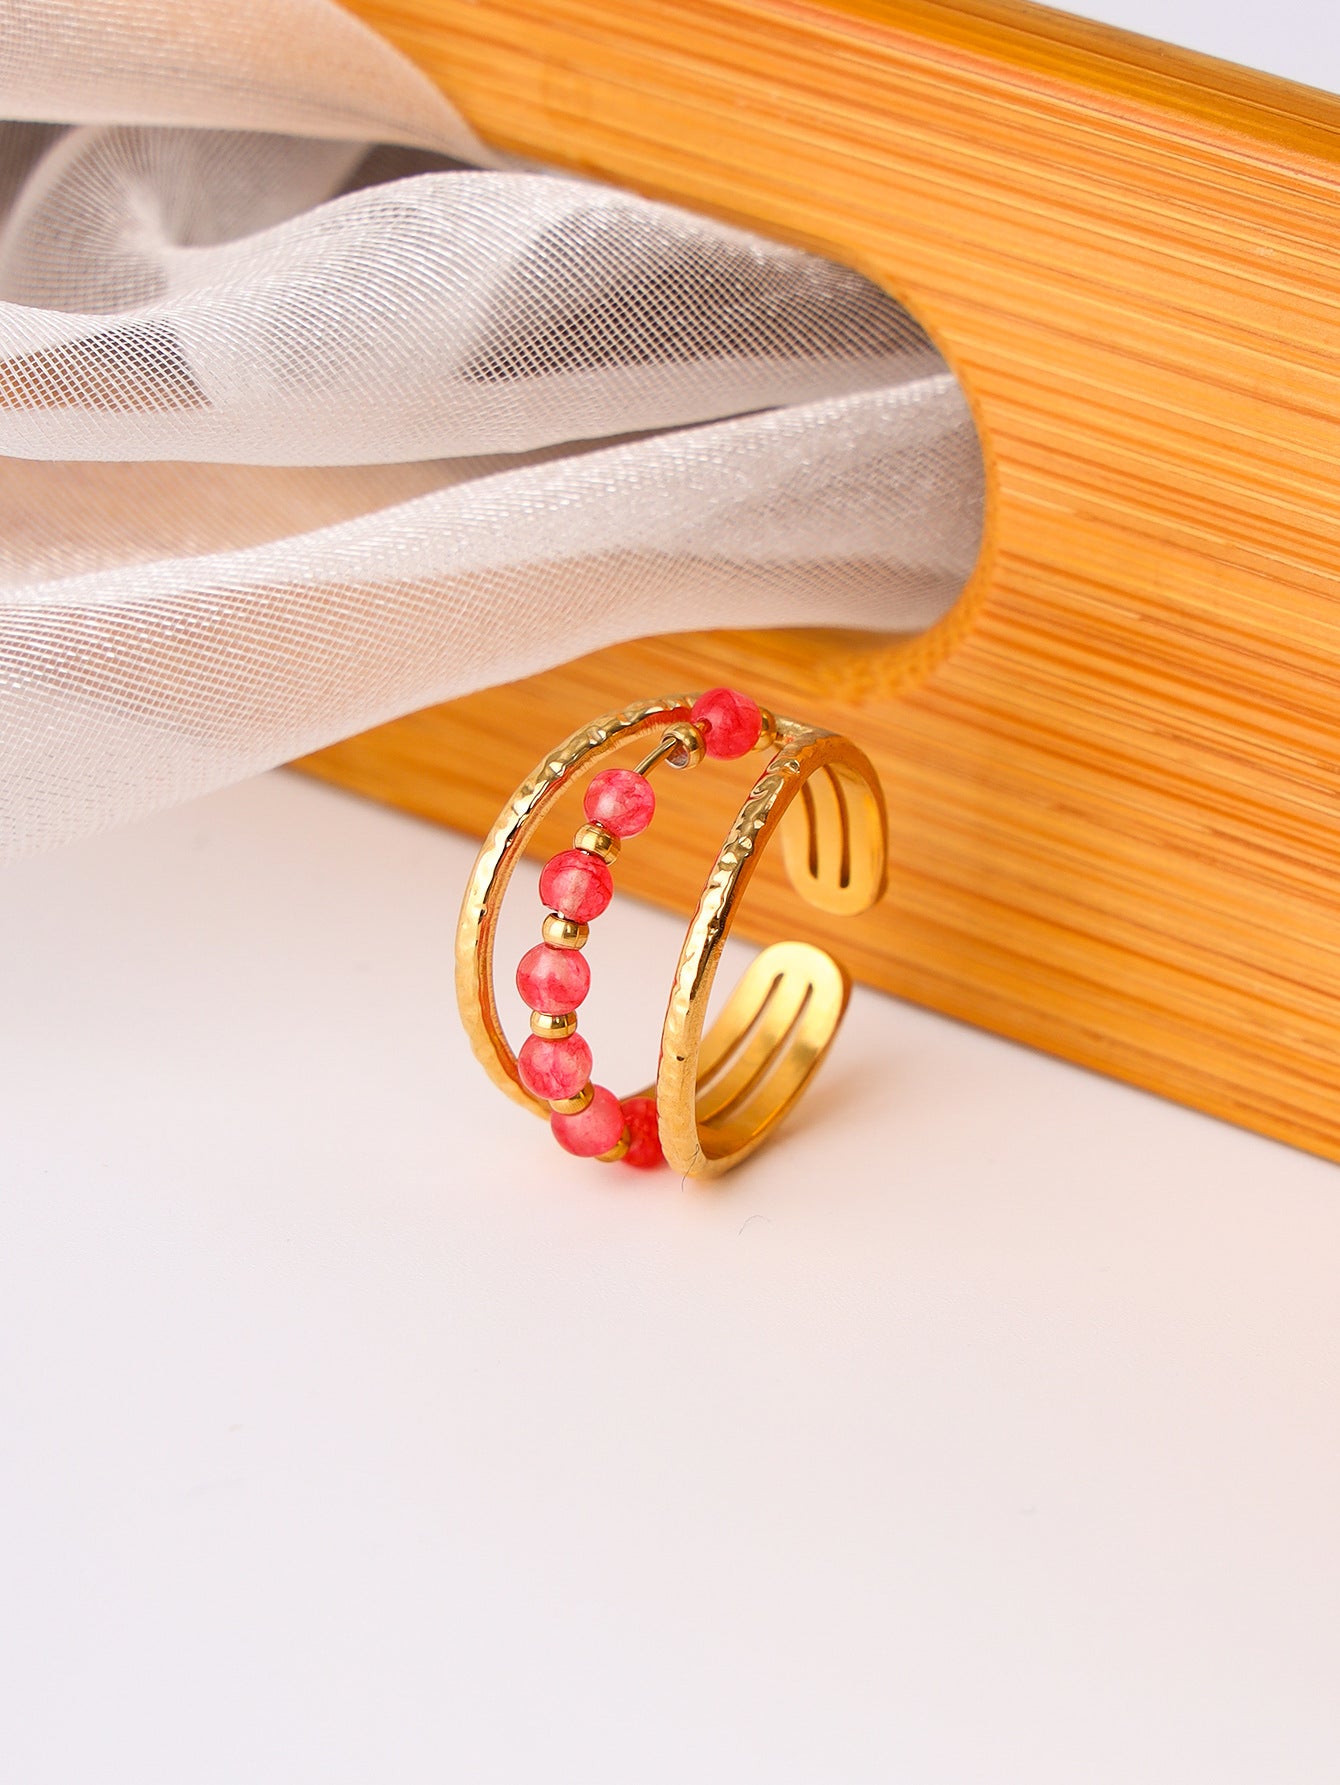 A Maramalive™ gold plated ring with turquoise beads.